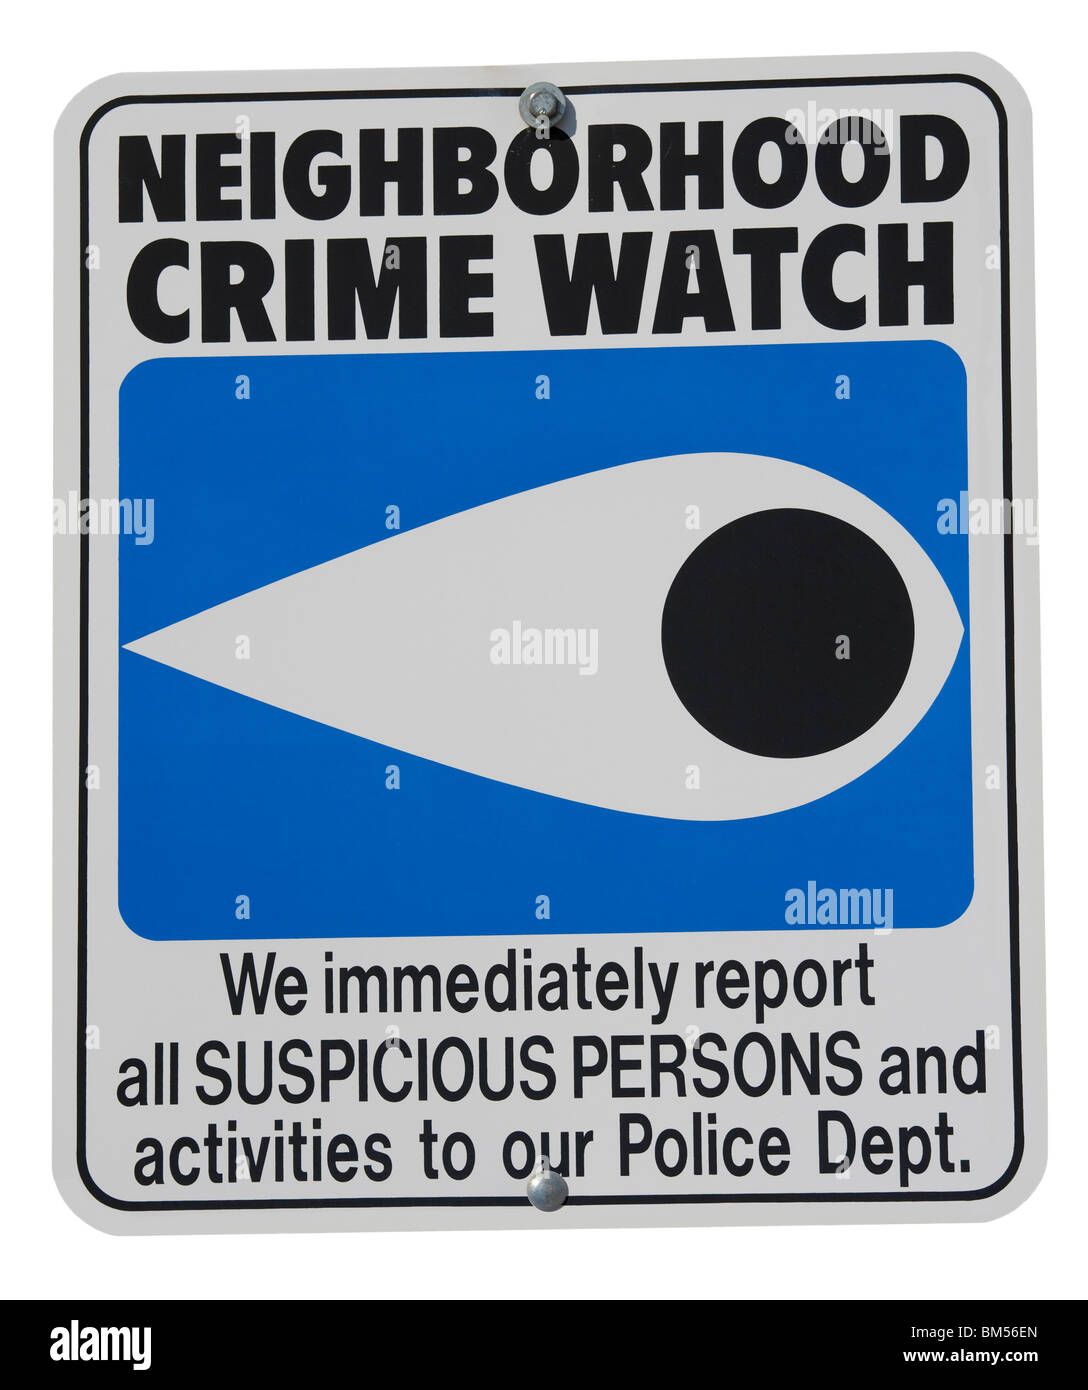 US road traffic sign neighborhood neighbourhood crime watch.We immediately report all suspicious persons to our police dept. Stock Photo